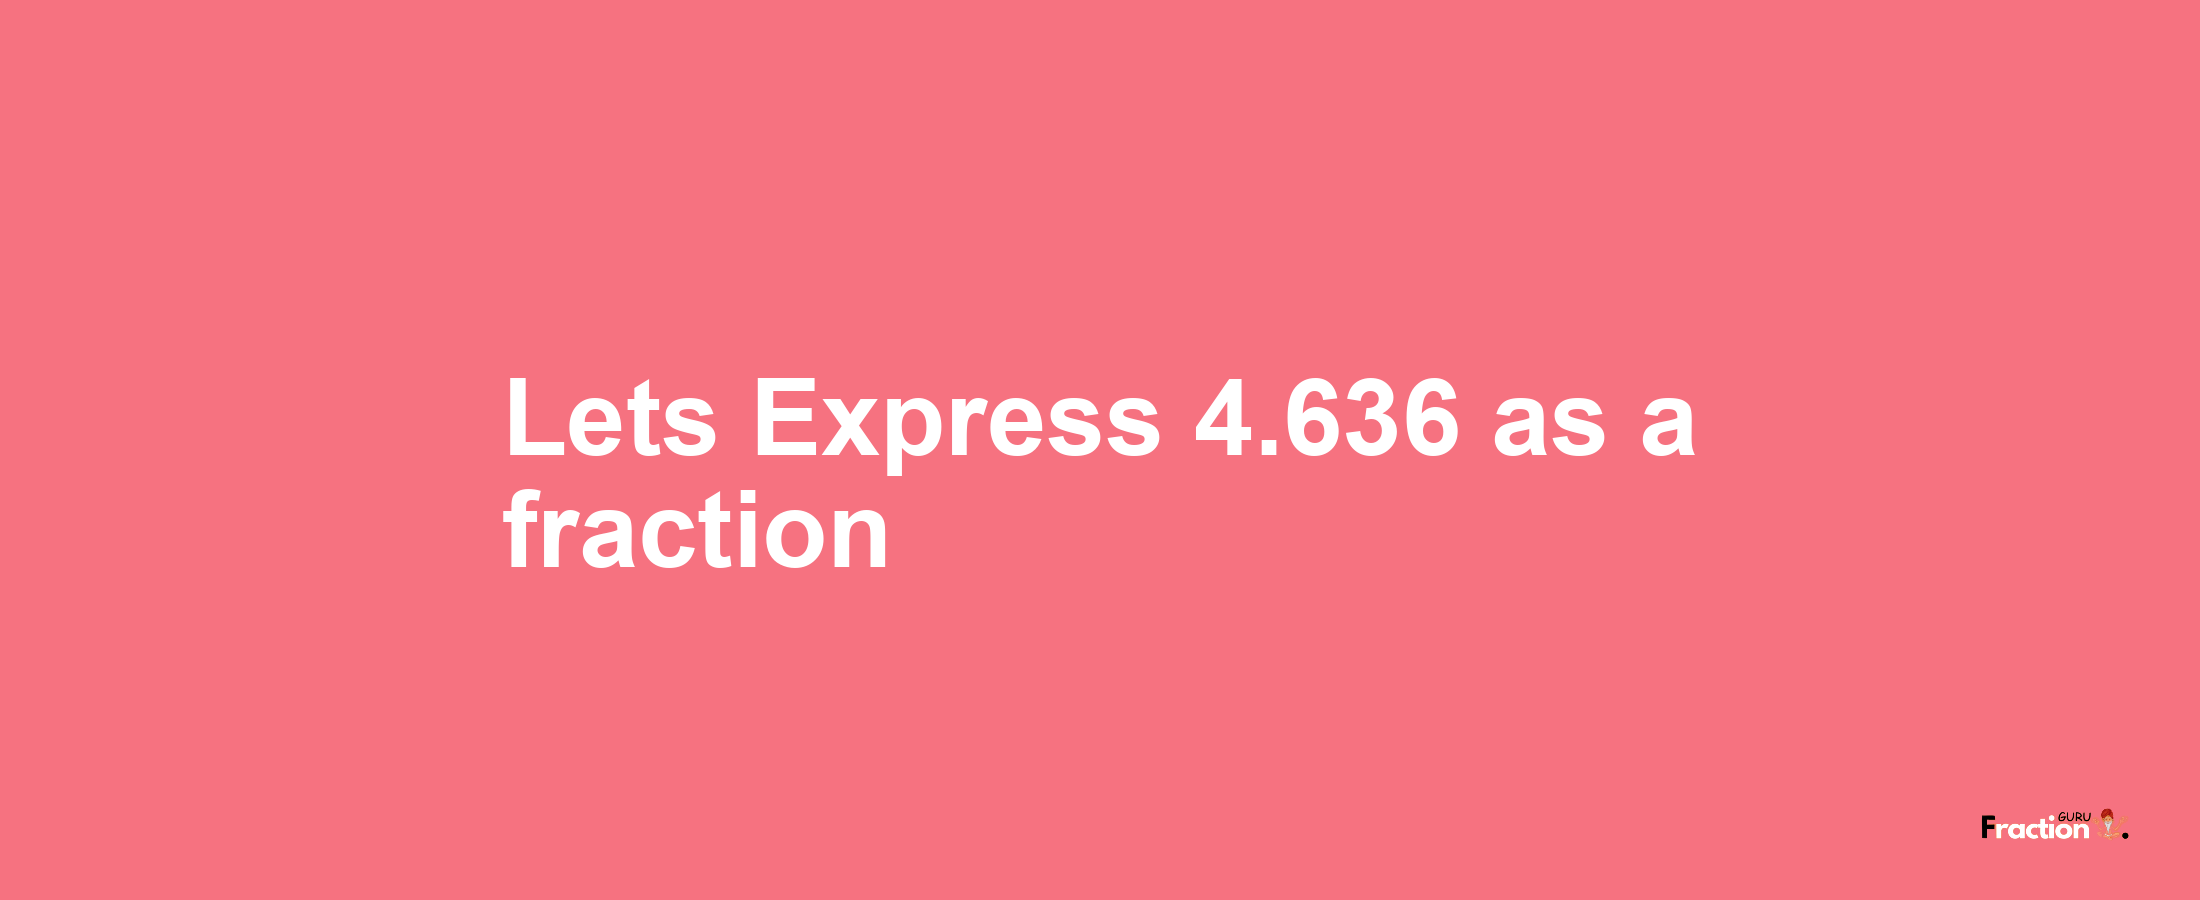 Lets Express 4.636 as afraction